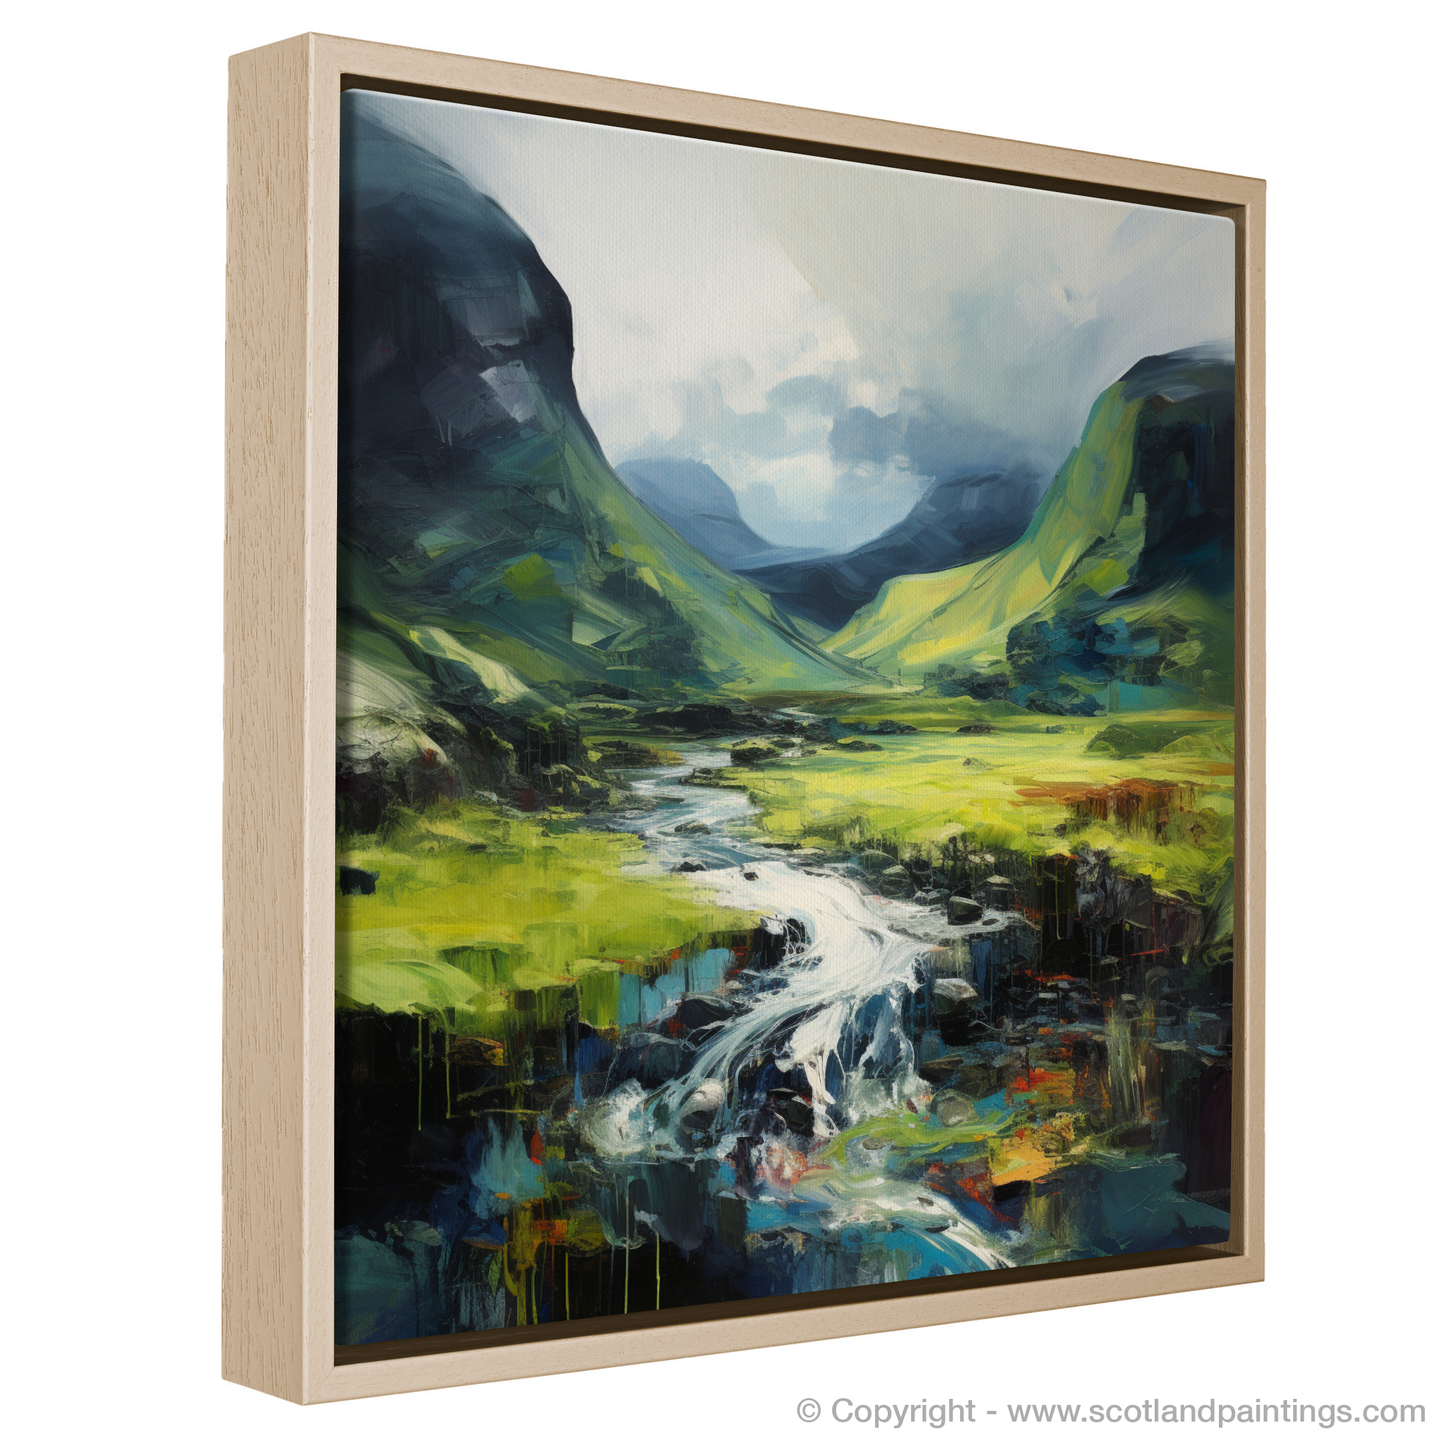 Painting and Art Print of Cruach Àrdrain entitled "Cruach Àrdrain Unleashed: An Expressionist Homage to Scottish Highlands".